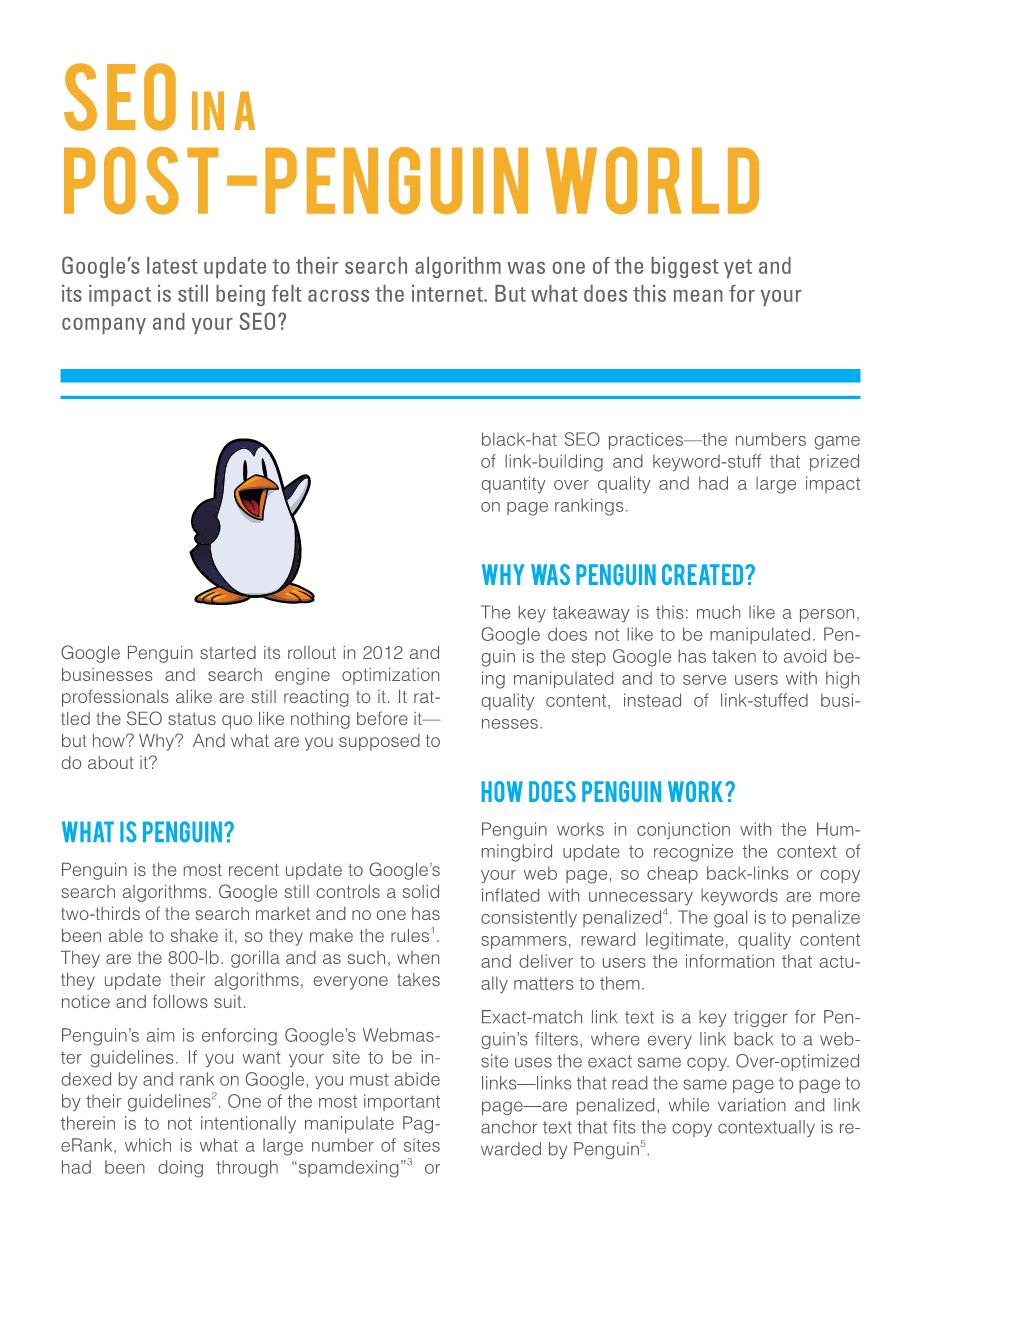 SEO in a POST-PENGUIN WORLD